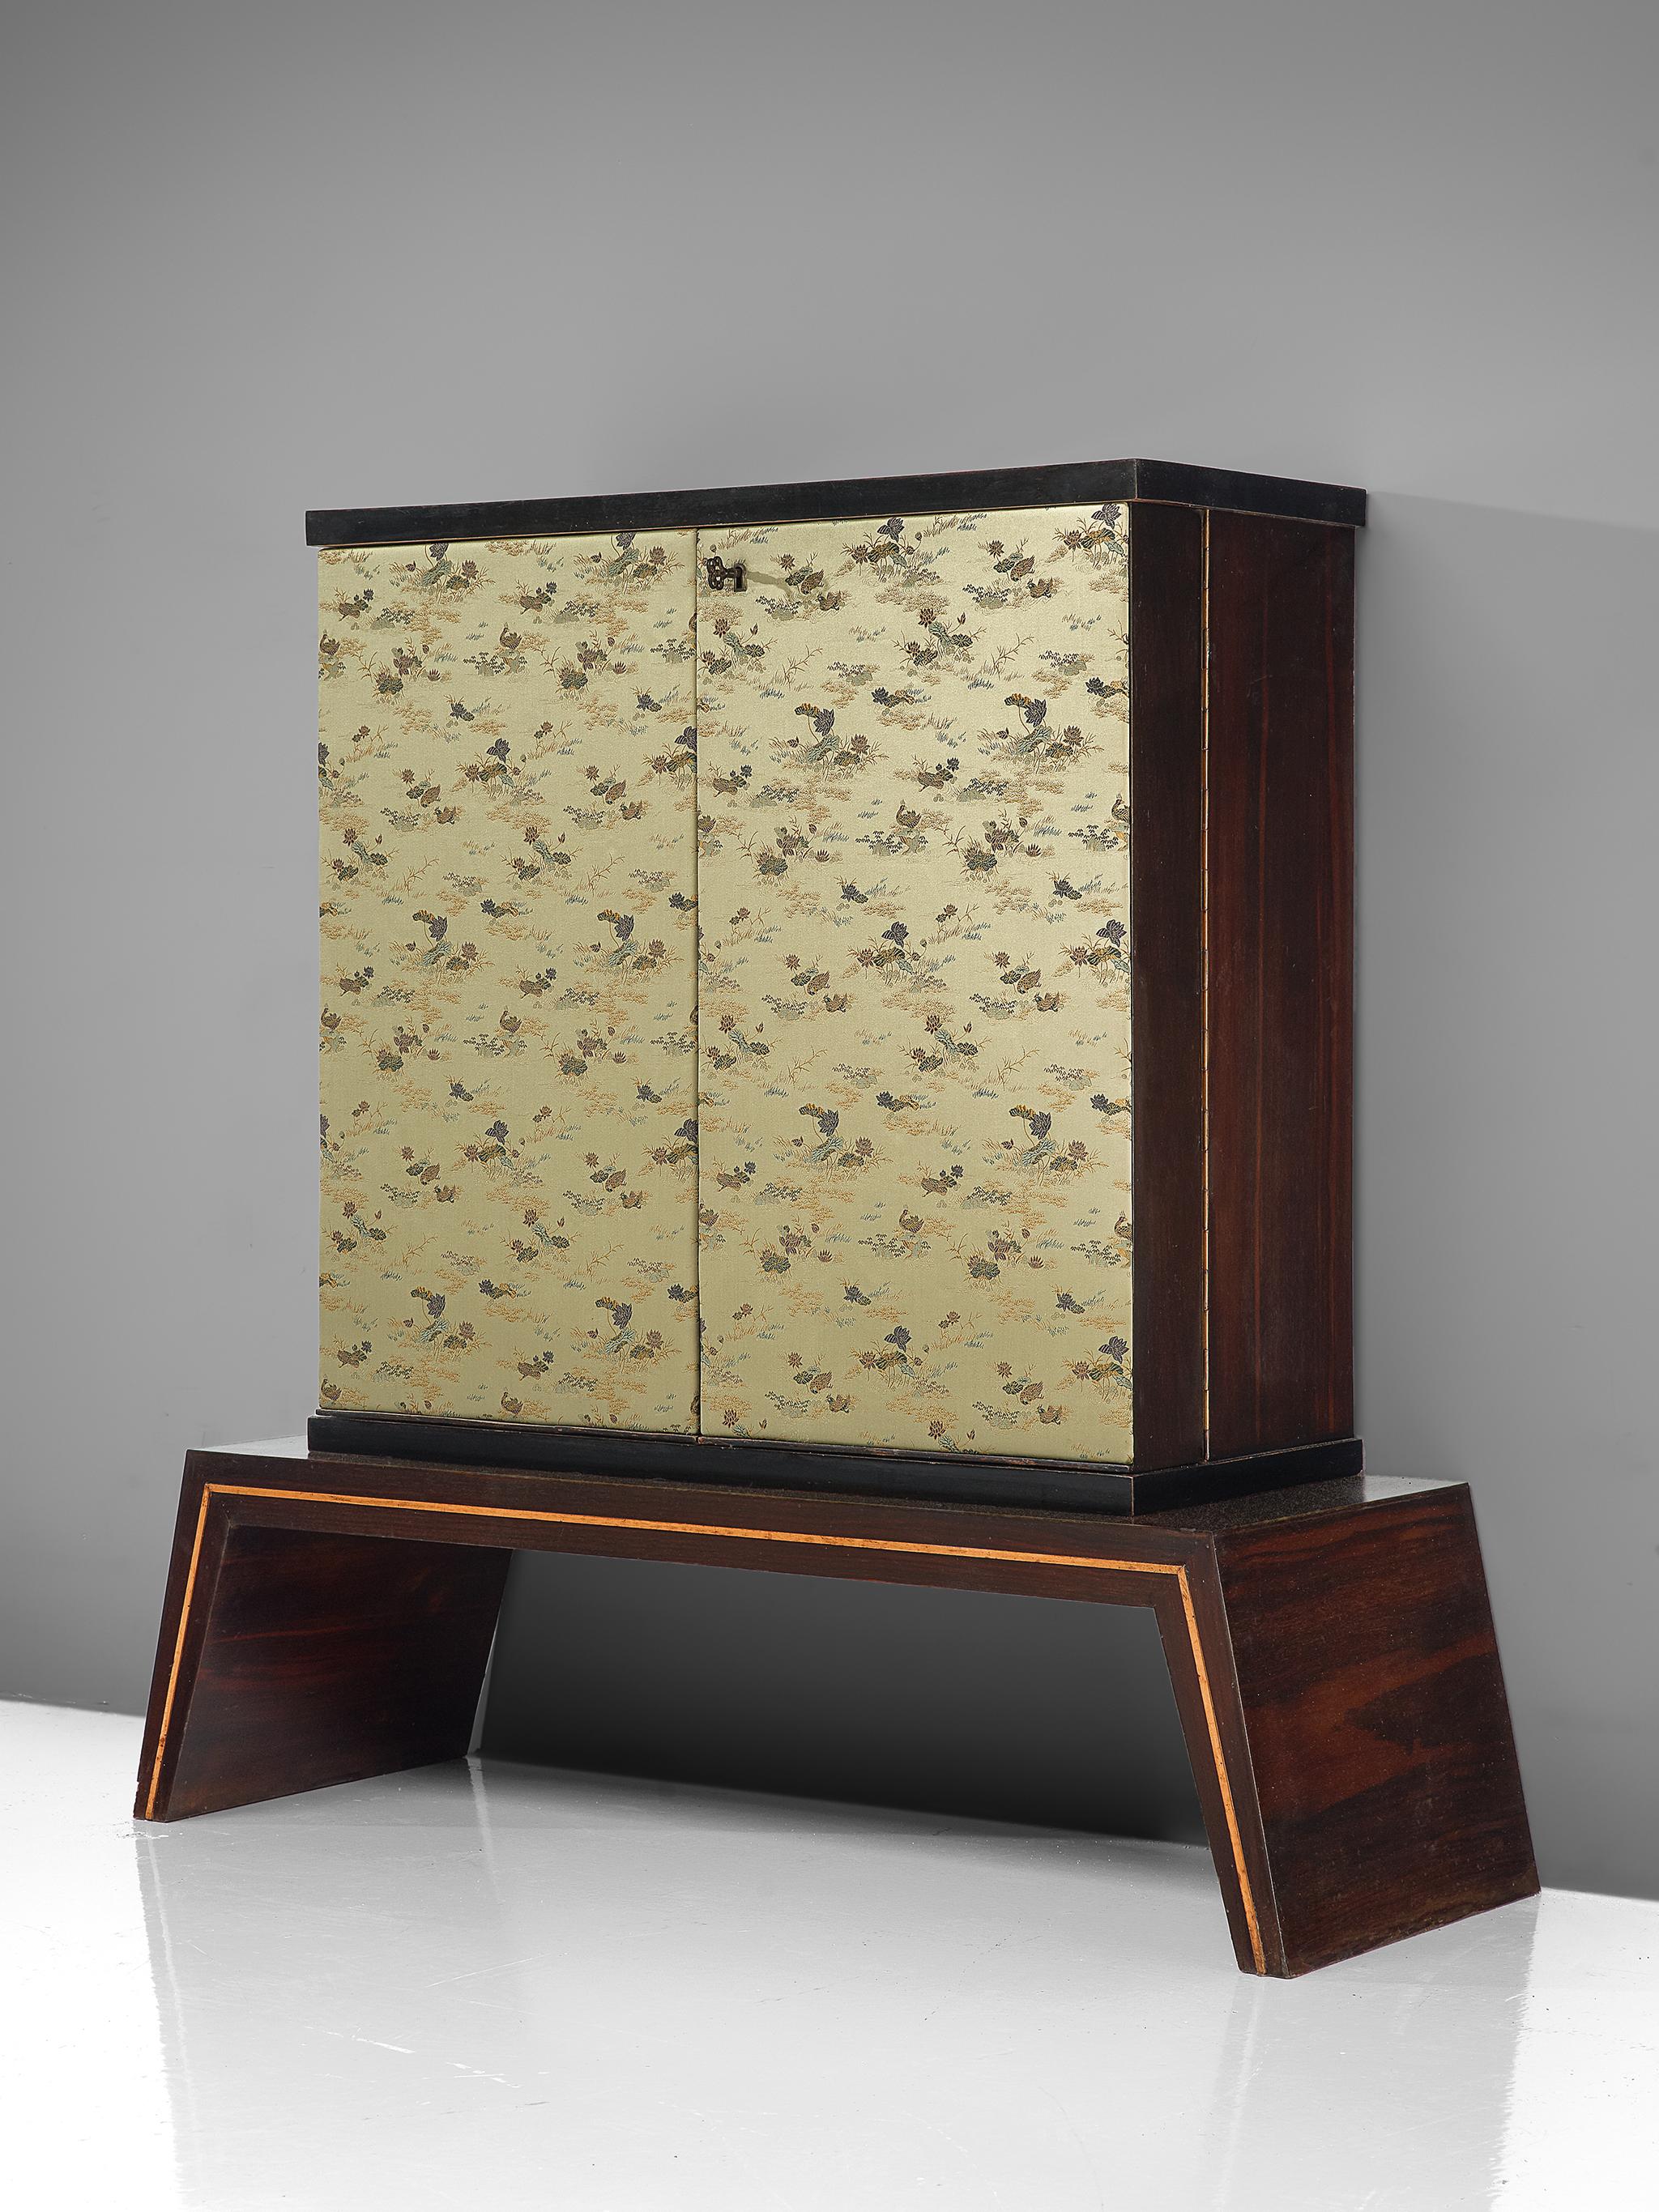 Dry bar cabinet, fabric, wood, and mirror, Italy 1950s.

This exquisite dry bar is illuminated and has a mirror interior with storage facilities. The front of the cabinet is covered with a Japanese inspired silk fabric which is still original. The